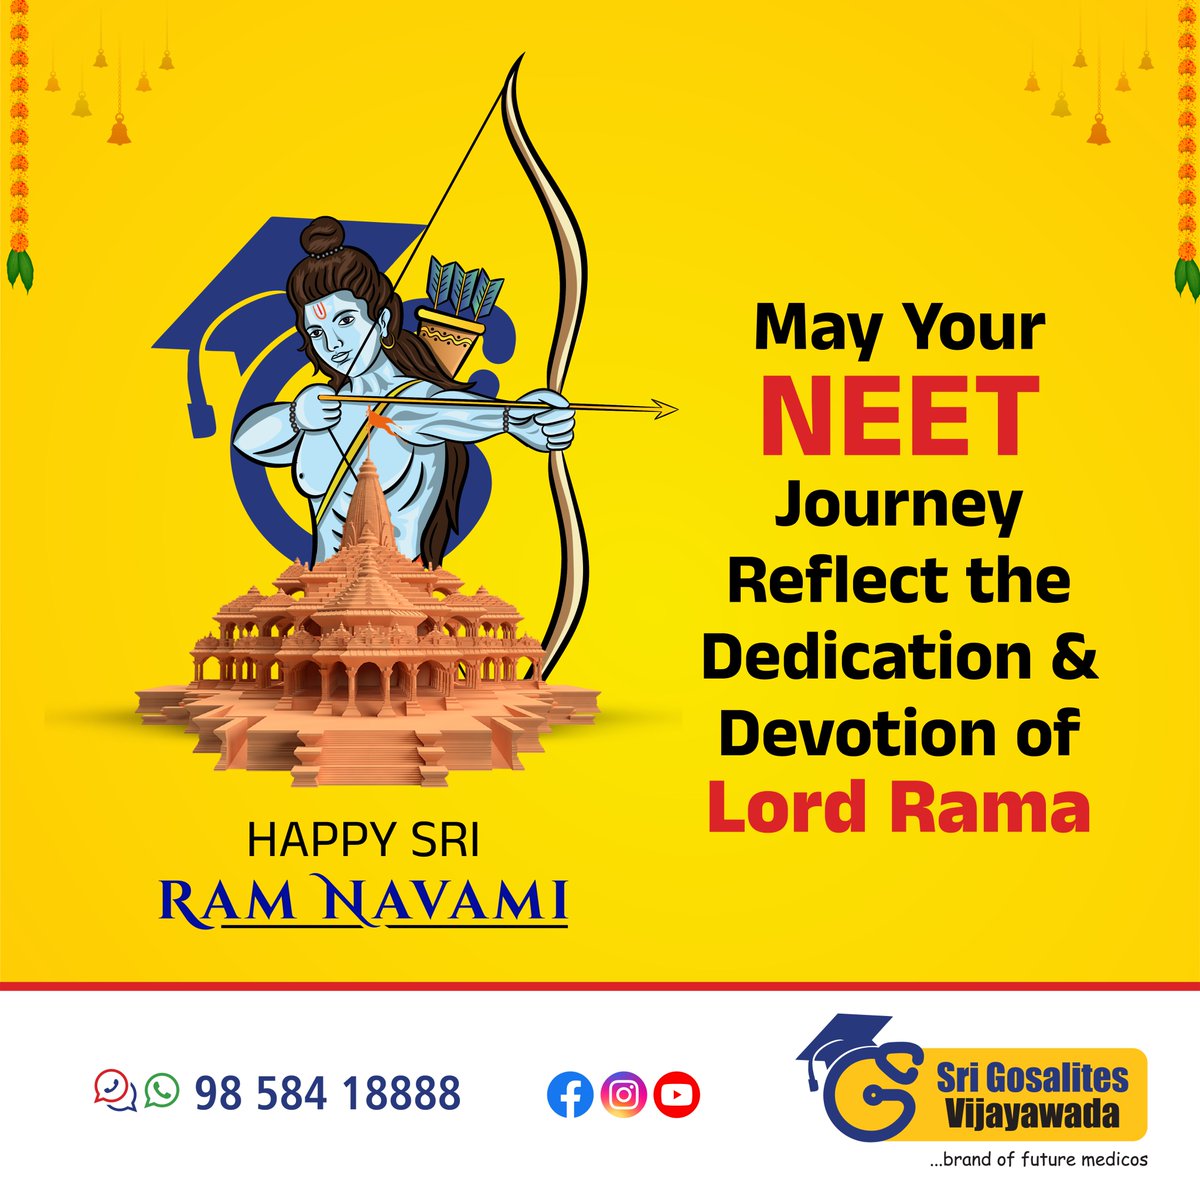 Happy Sri Rama Navami !!
May Your NEET Journey Reflect on the Dedication and Devotion of Lord Rama
 
May your journey to NEET success mirror the determination and commitment of Lord #Rama.
#Gosalites #sriramnavami #Happysriramnavami #RamNavami2024 #RamaNavami #shreeram #sitaram